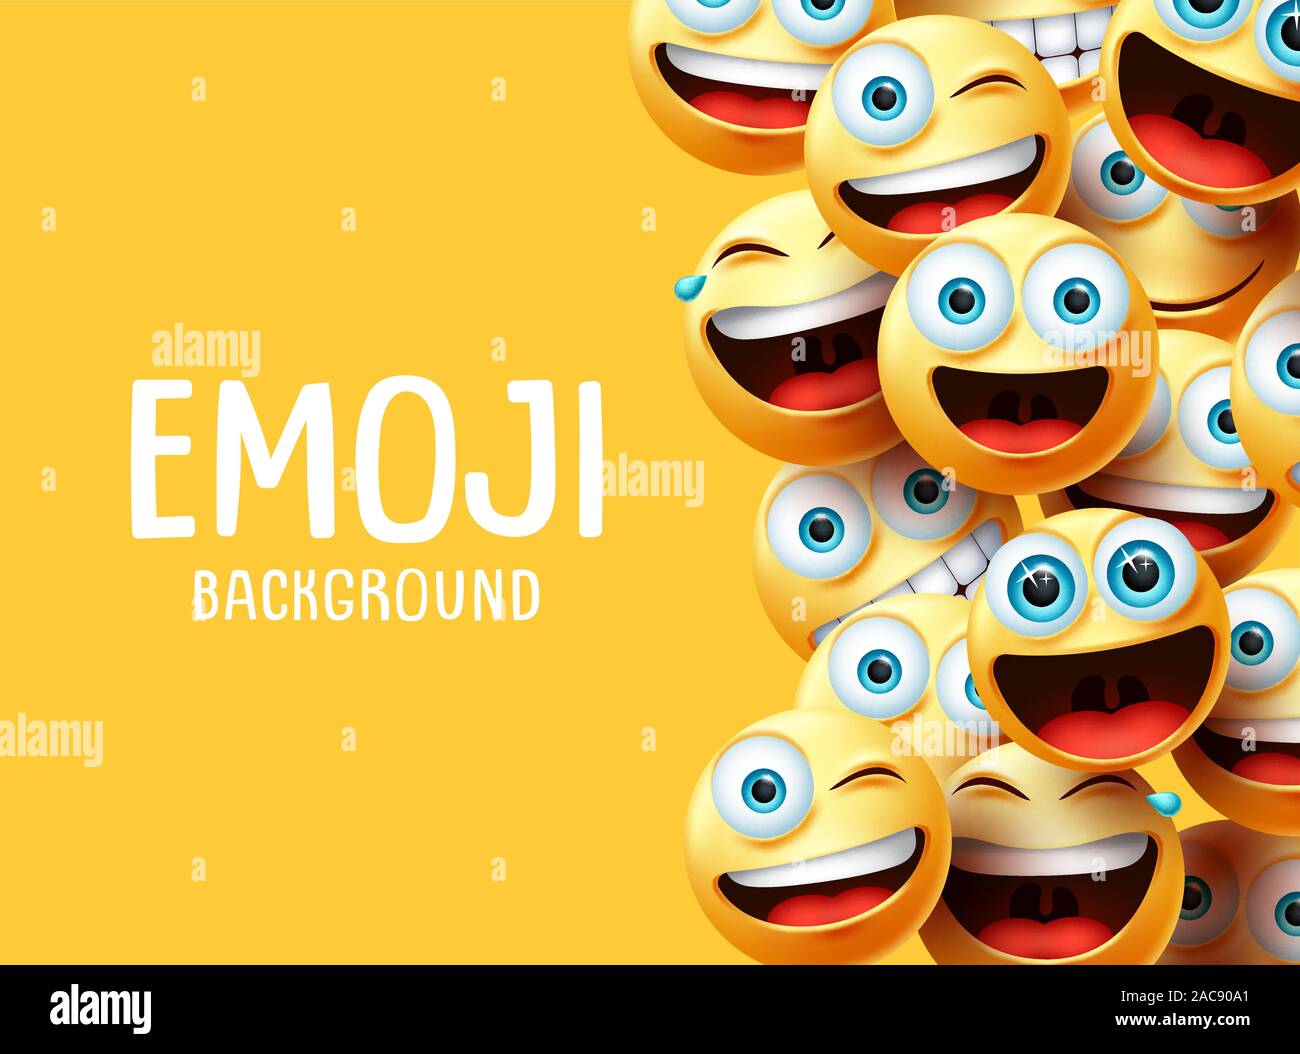 Emojis vector background. Funny smiley emoji background text with emoticon group face head in excited, surprise, smiling and happy expression. Stock Vector